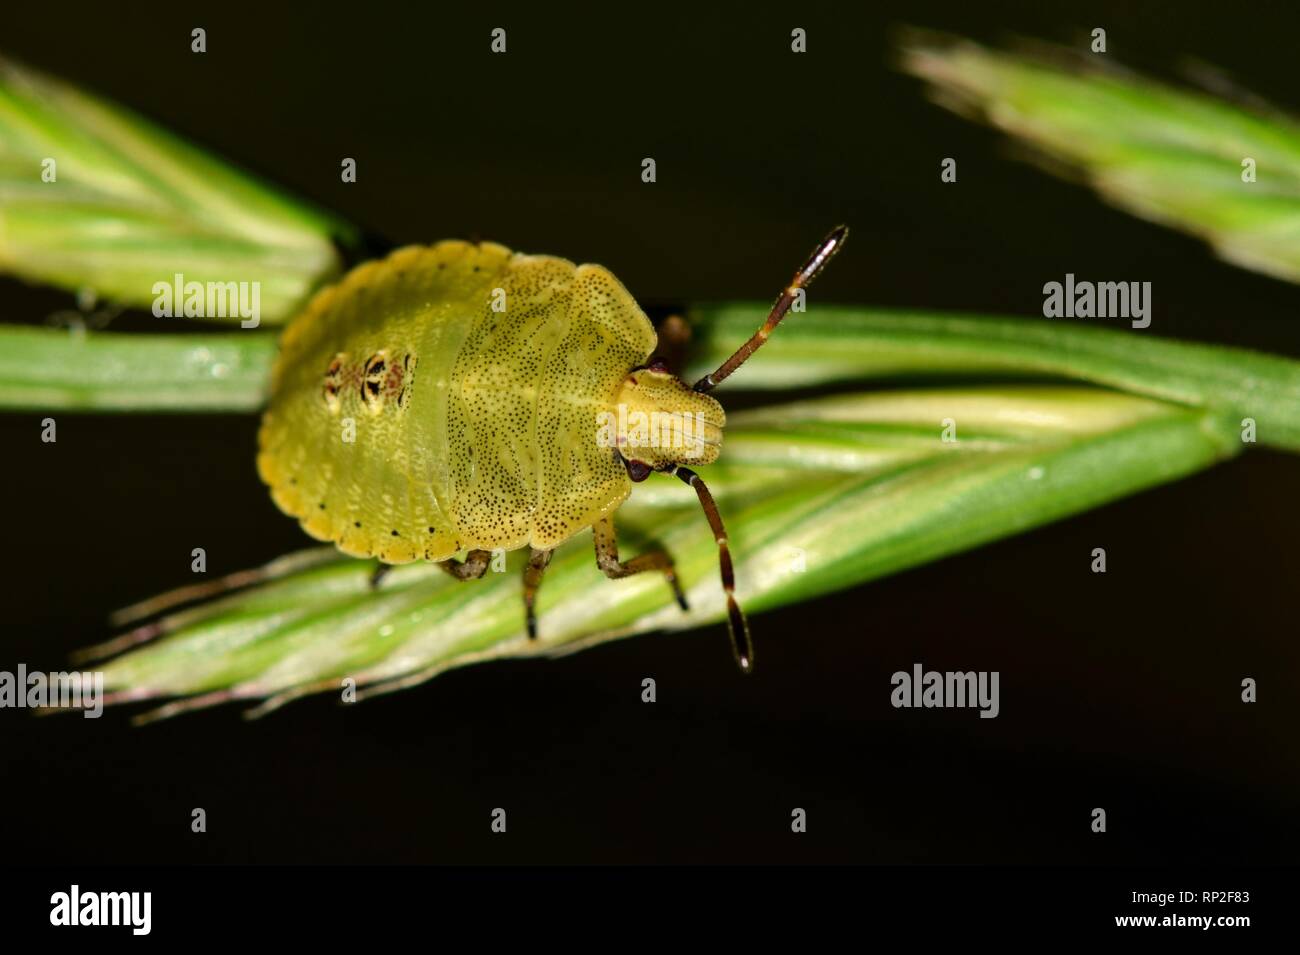 A green shield bug nymph foraging at night on some plant stalks in Houston, TX with a black background. Stock Photo